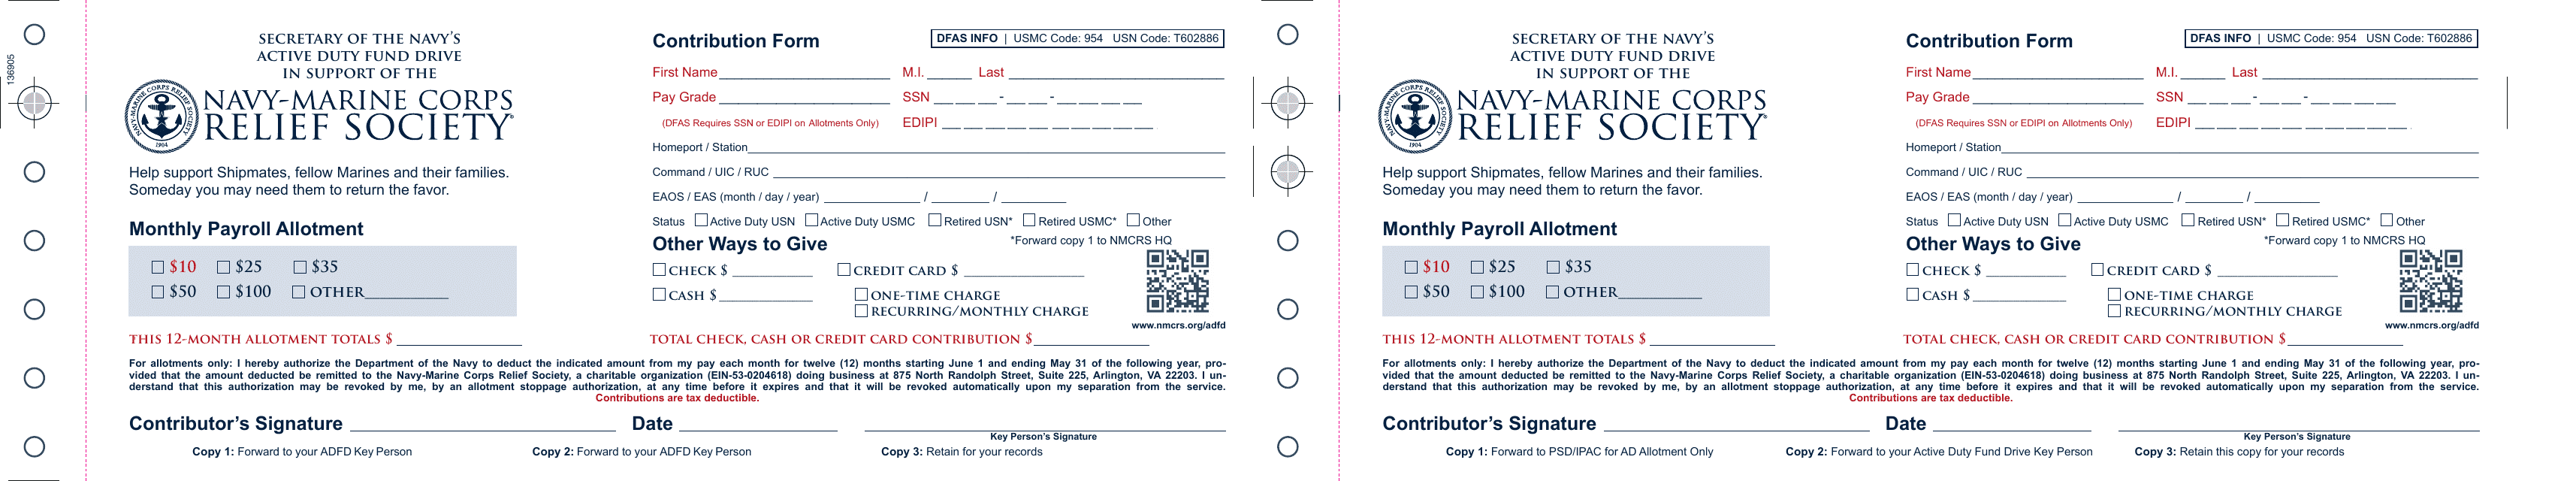 Contribution Form - the Secretary of the Navy&#039;s Active Duty Fund Drive in Support of the Navy-Marine Corps Relief Society